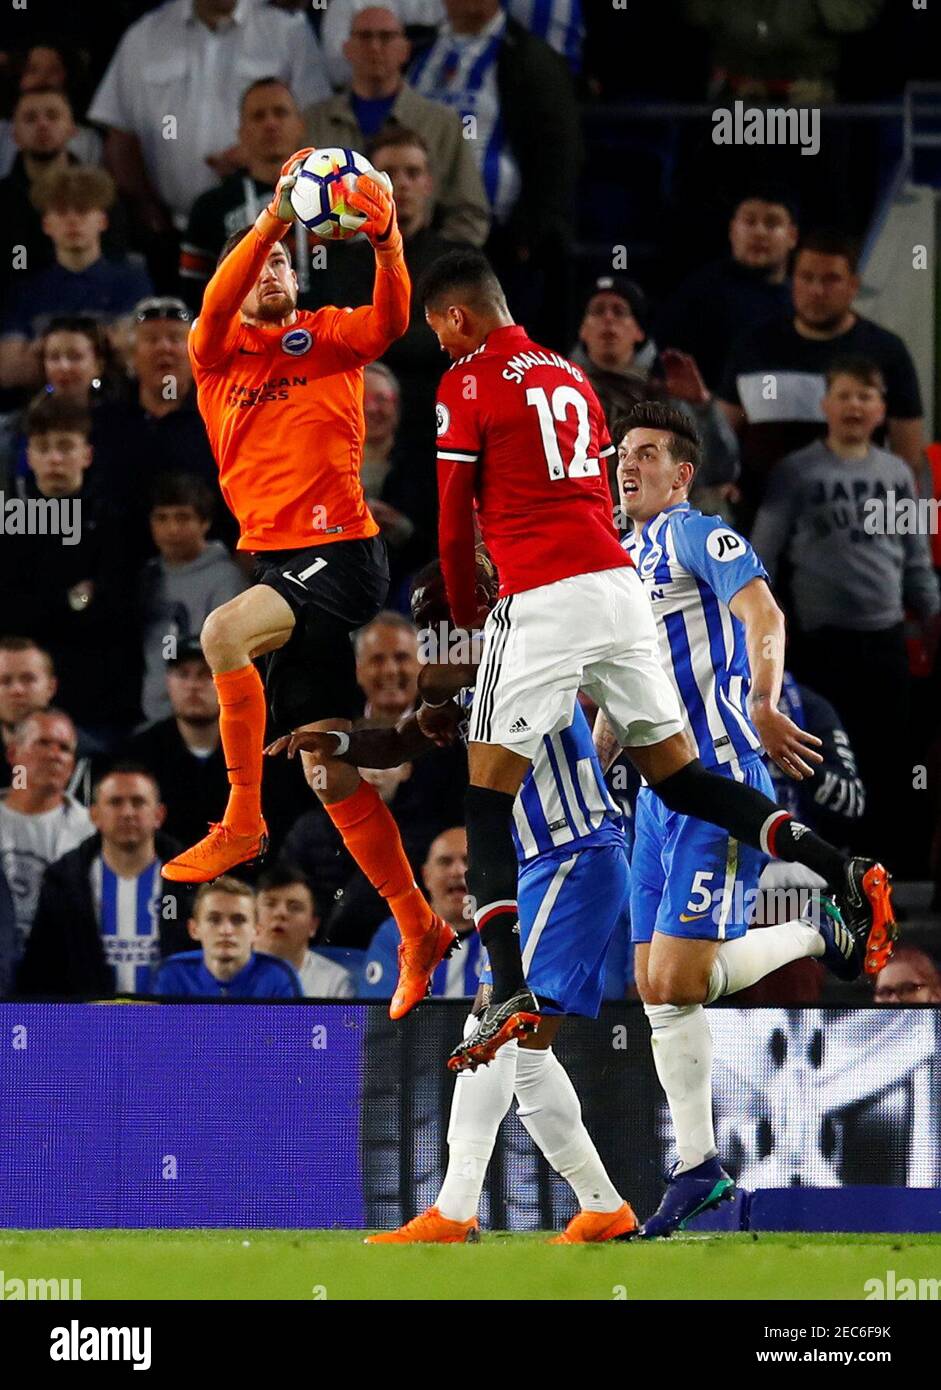 Soccer Football - Premier League - Brighton & Hove Albion v Manchester United - The American Express Community Stadium, Brighton, Britain - May 4, 2018   Brighton's Mathew Ryan gathers from Manchester United's Chris Smalling   REUTERS/Eddie Keogh    EDITORIAL USE ONLY. No use with unauthorized audio, video, data, fixture lists, club/league logos or 'live' services. Online in-match use limited to 75 images, no video emulation. No use in betting, games or single club/league/player publications.  Please contact your account representative for further details. Stock Photo